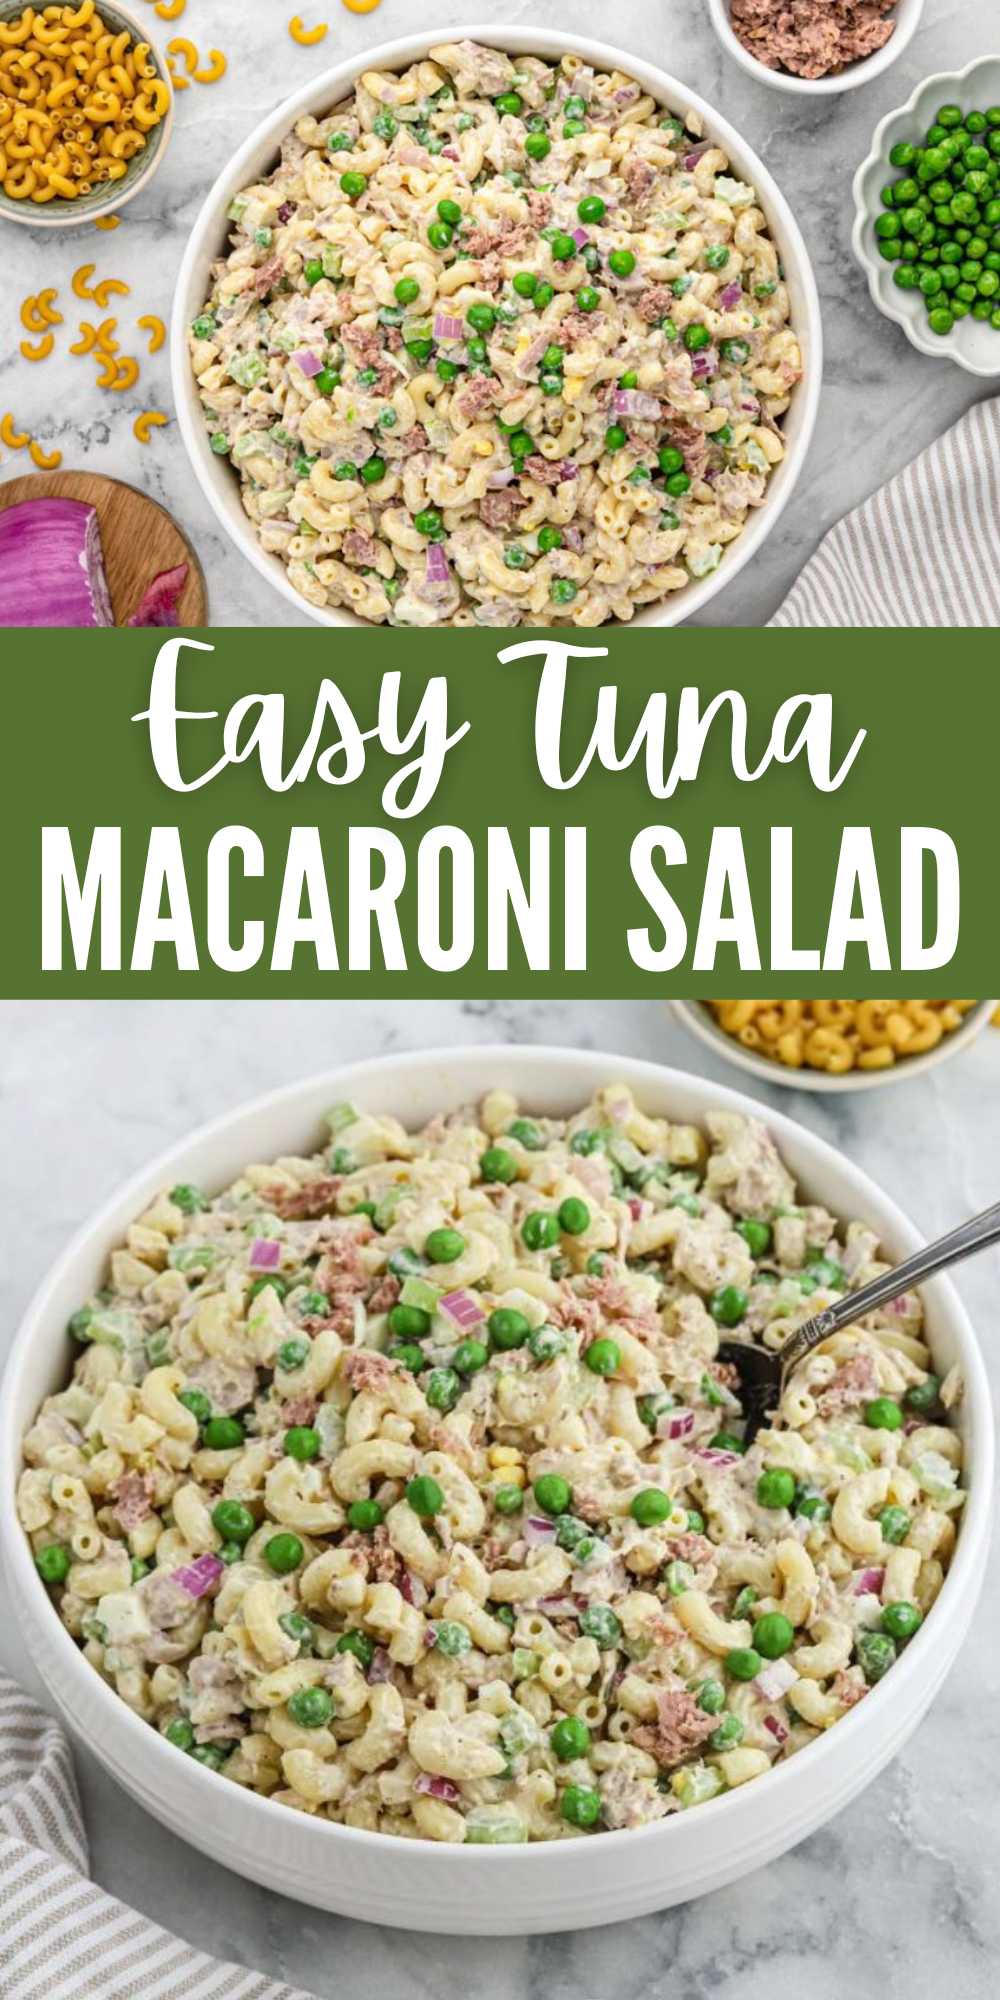 This classic Tuna Macaroni Salad is perfect for your summer BBQ's. It is loaded with flavor and easy to make with simple ingredients. Take to your summer potlucks or enjoy for a light lunch throughout the week. #eatingonadime #tunamacaronisalad #macaronisalad